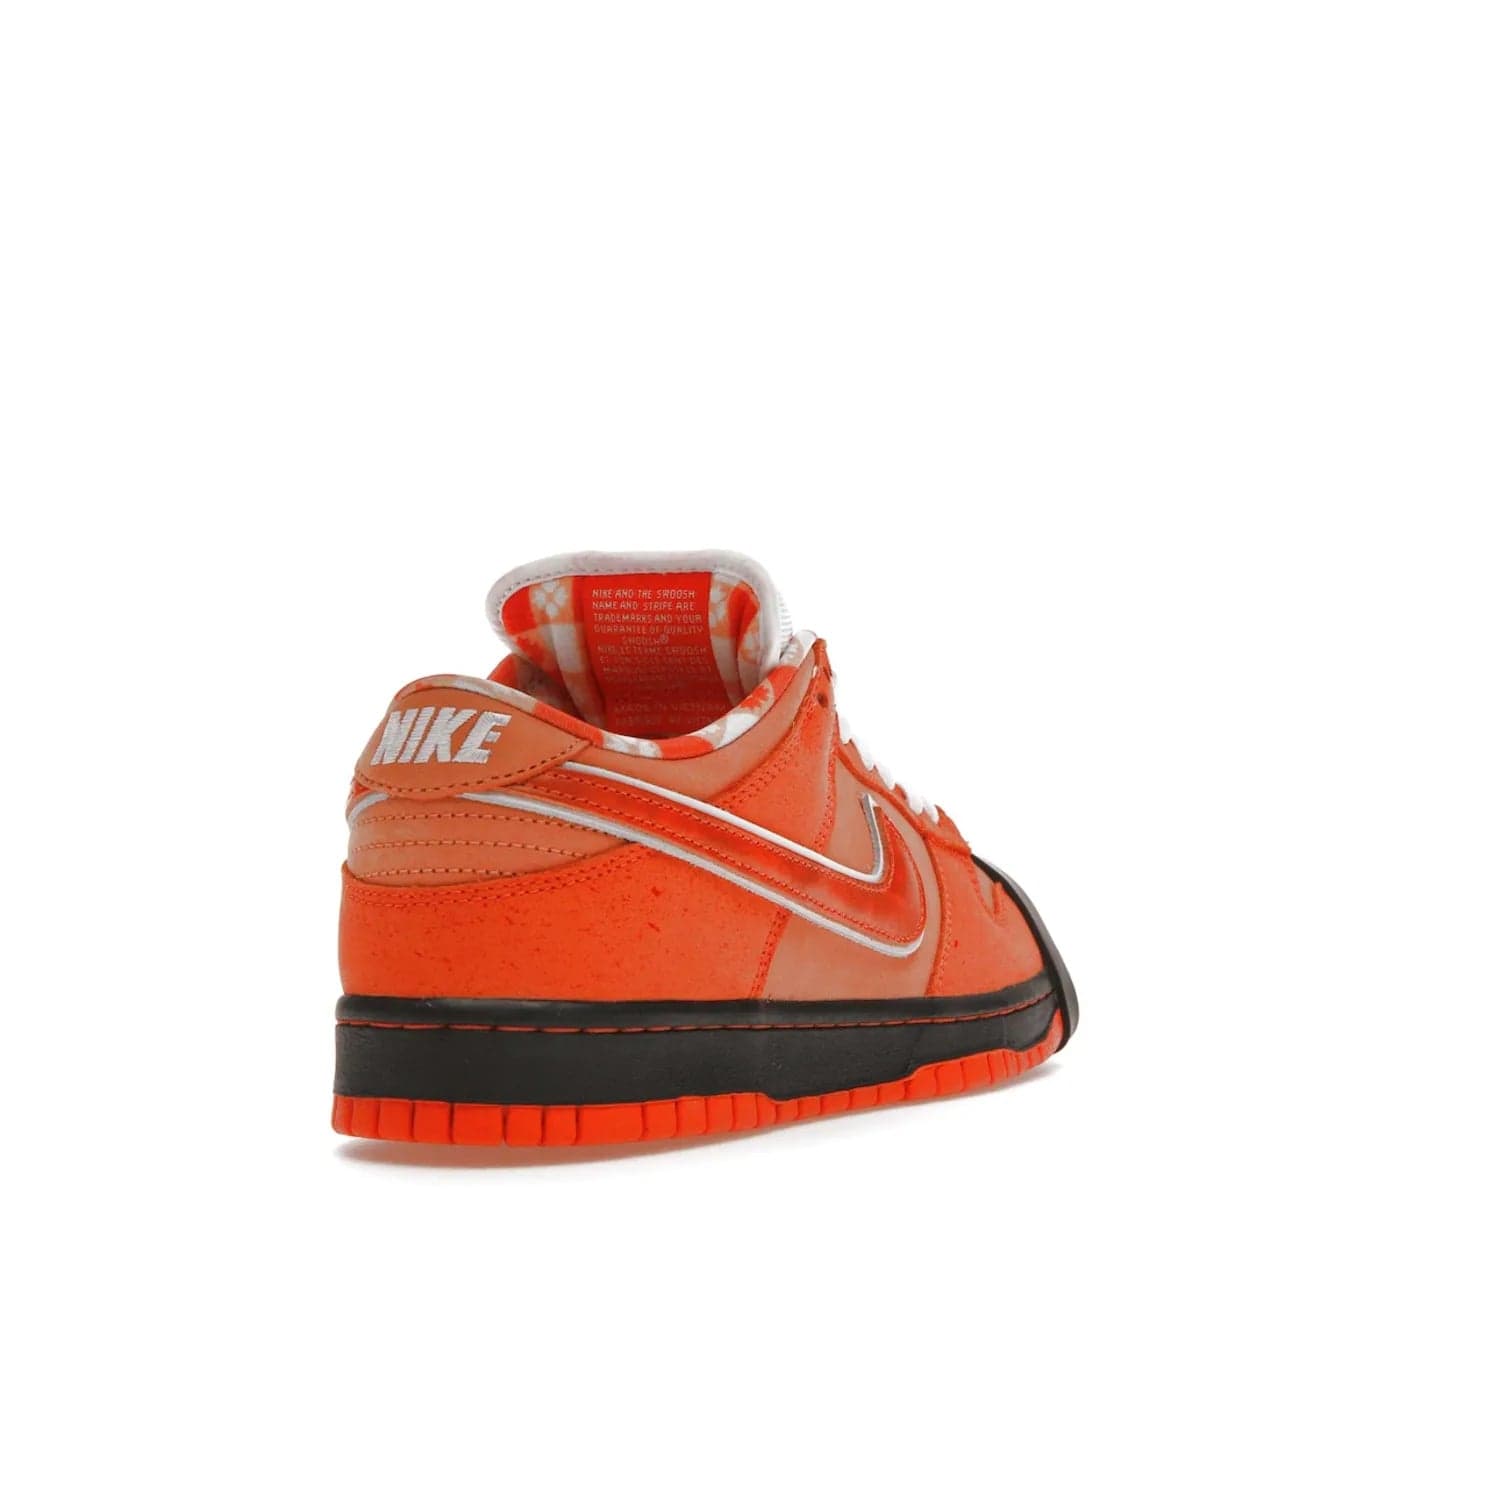 Nike SB Dunk Low Concepts Orange Lobster - Image 31 - Only at www.BallersClubKickz.com - Make a statement with the Nike SB Dunk Low Concepts Orange Lobster. Variety of orange hues, nubuck upper, bib-inspired lining & rubber outsole create bold look & comfortable blend of style. Available December 20th, 2022.